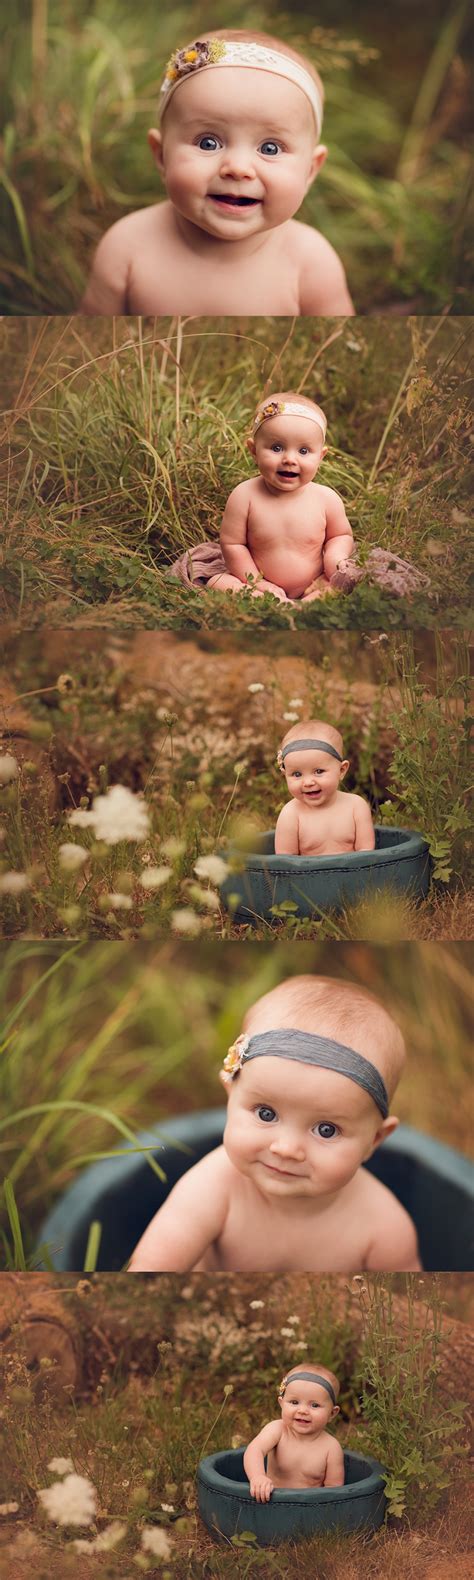 Baby In Tub Outside Cuteness Overload 6 Month Photography Toddler